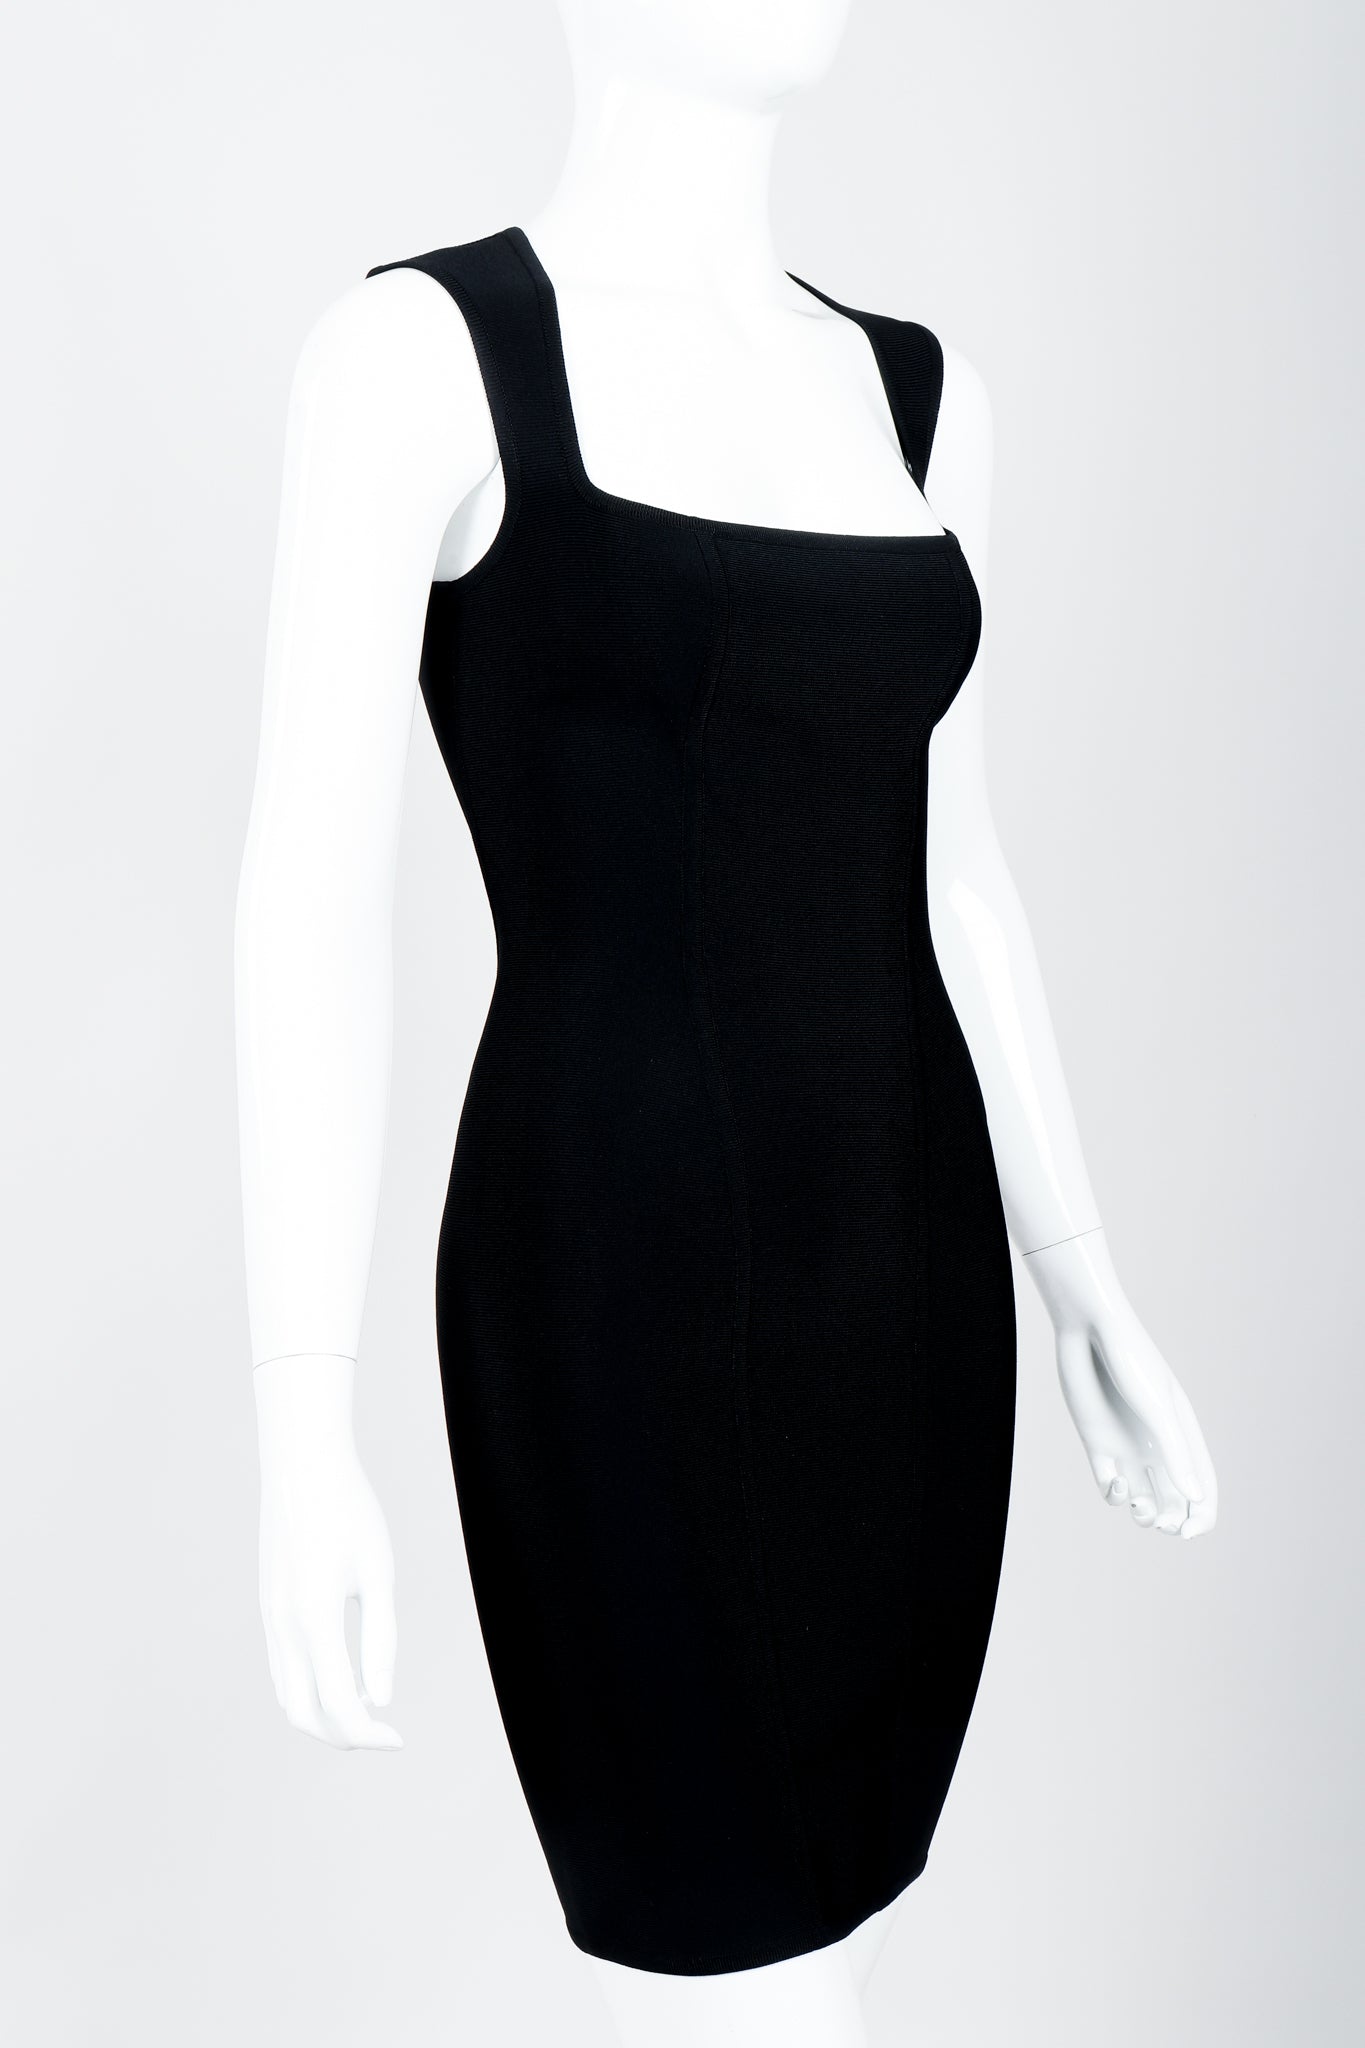 Vintage Herve Leger Queen Anne Bodycon Stretch Cocktail Dress on Mannequin crop angle at Recess